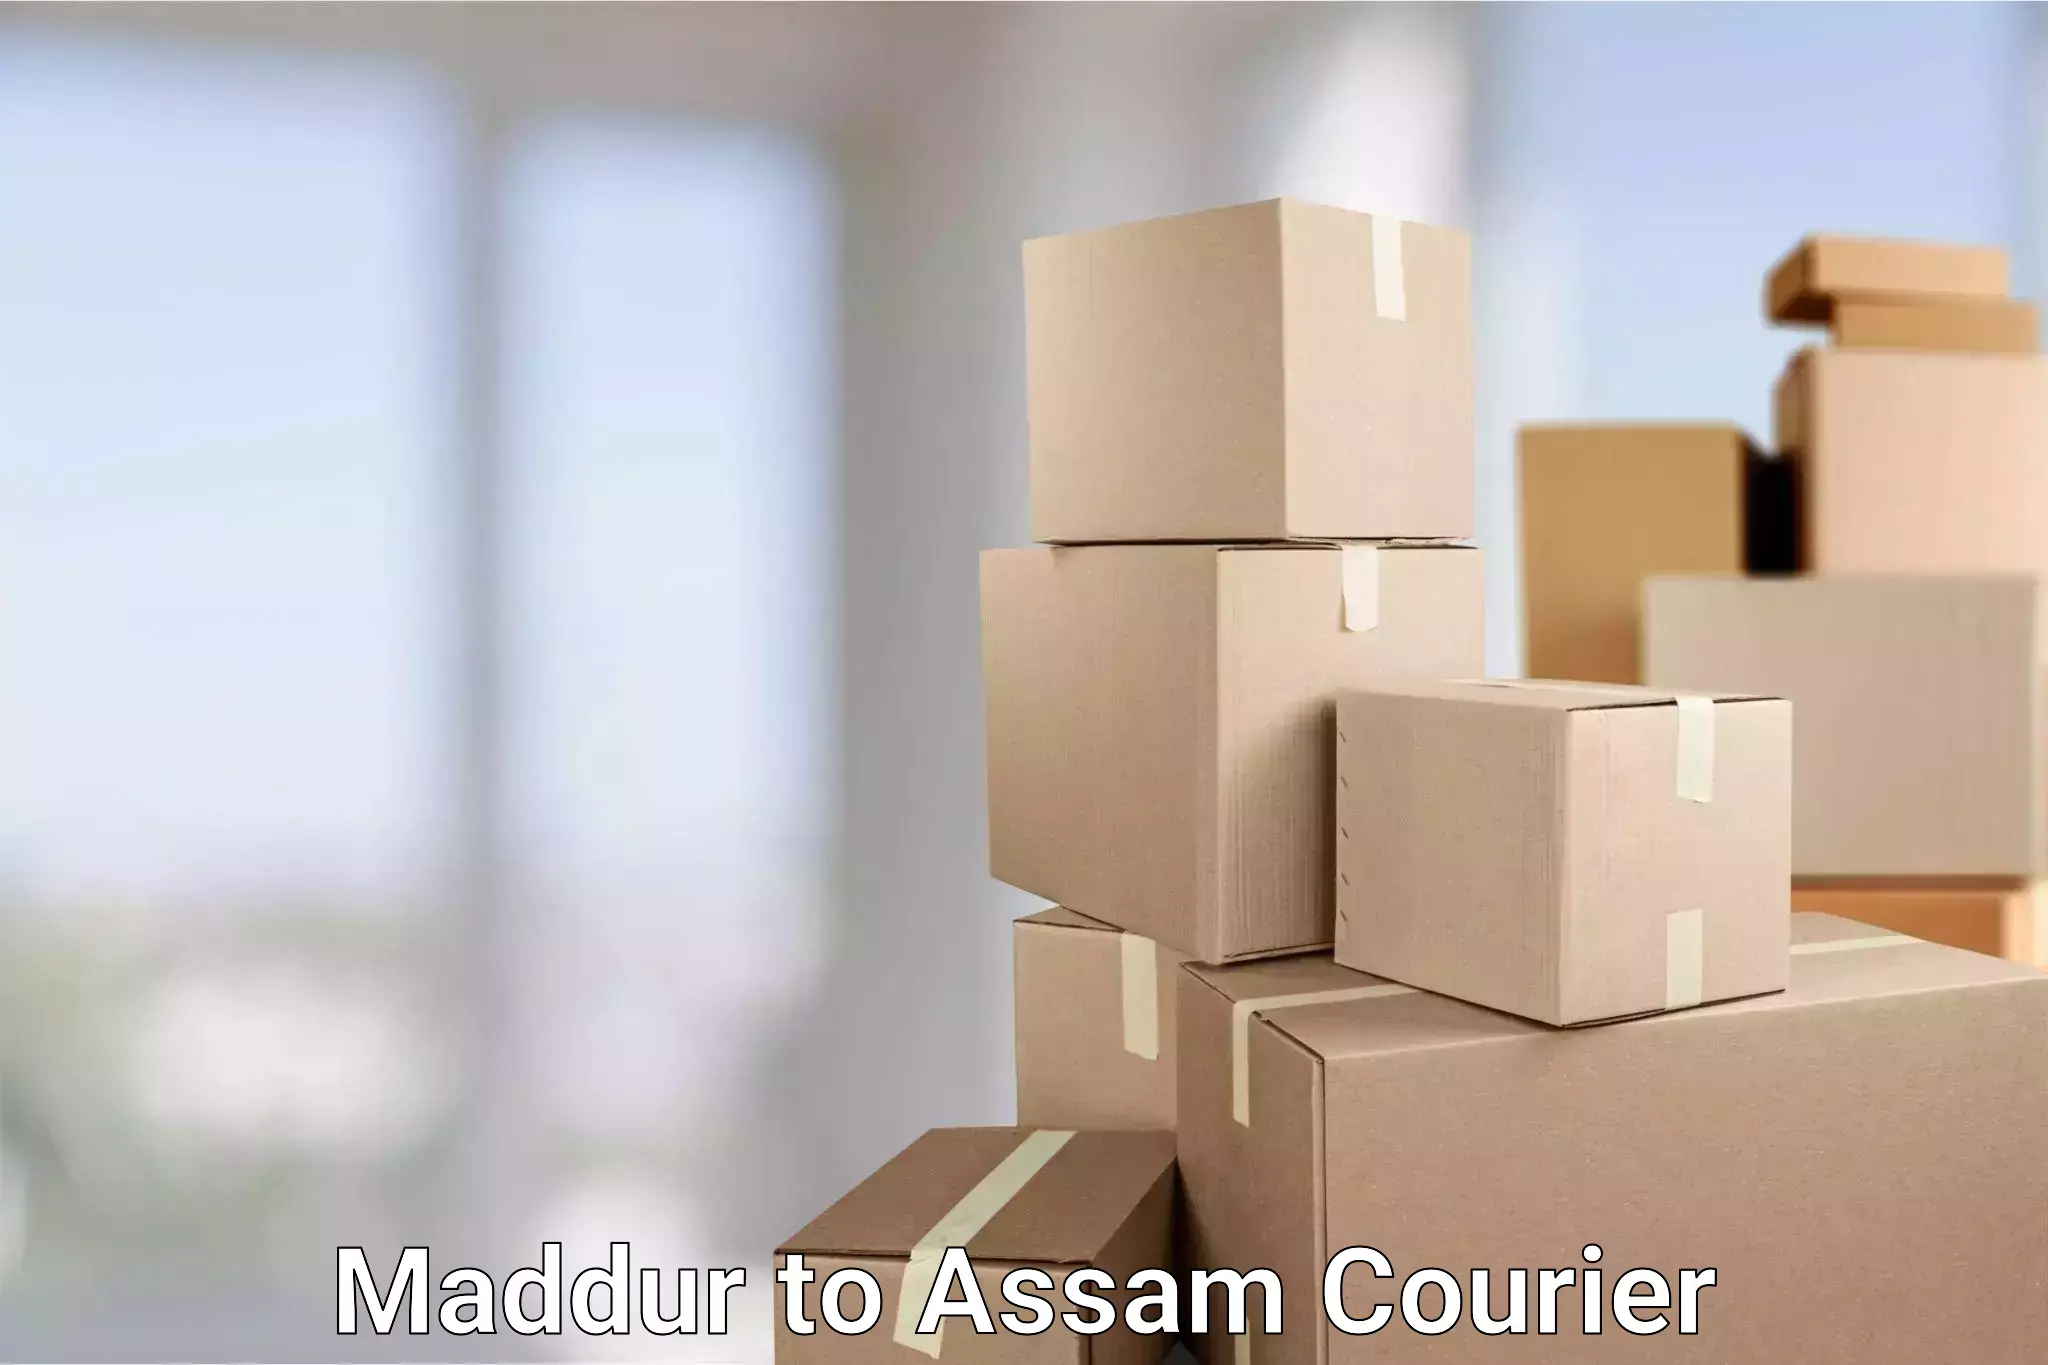 Full-service courier options Maddur to Kampur